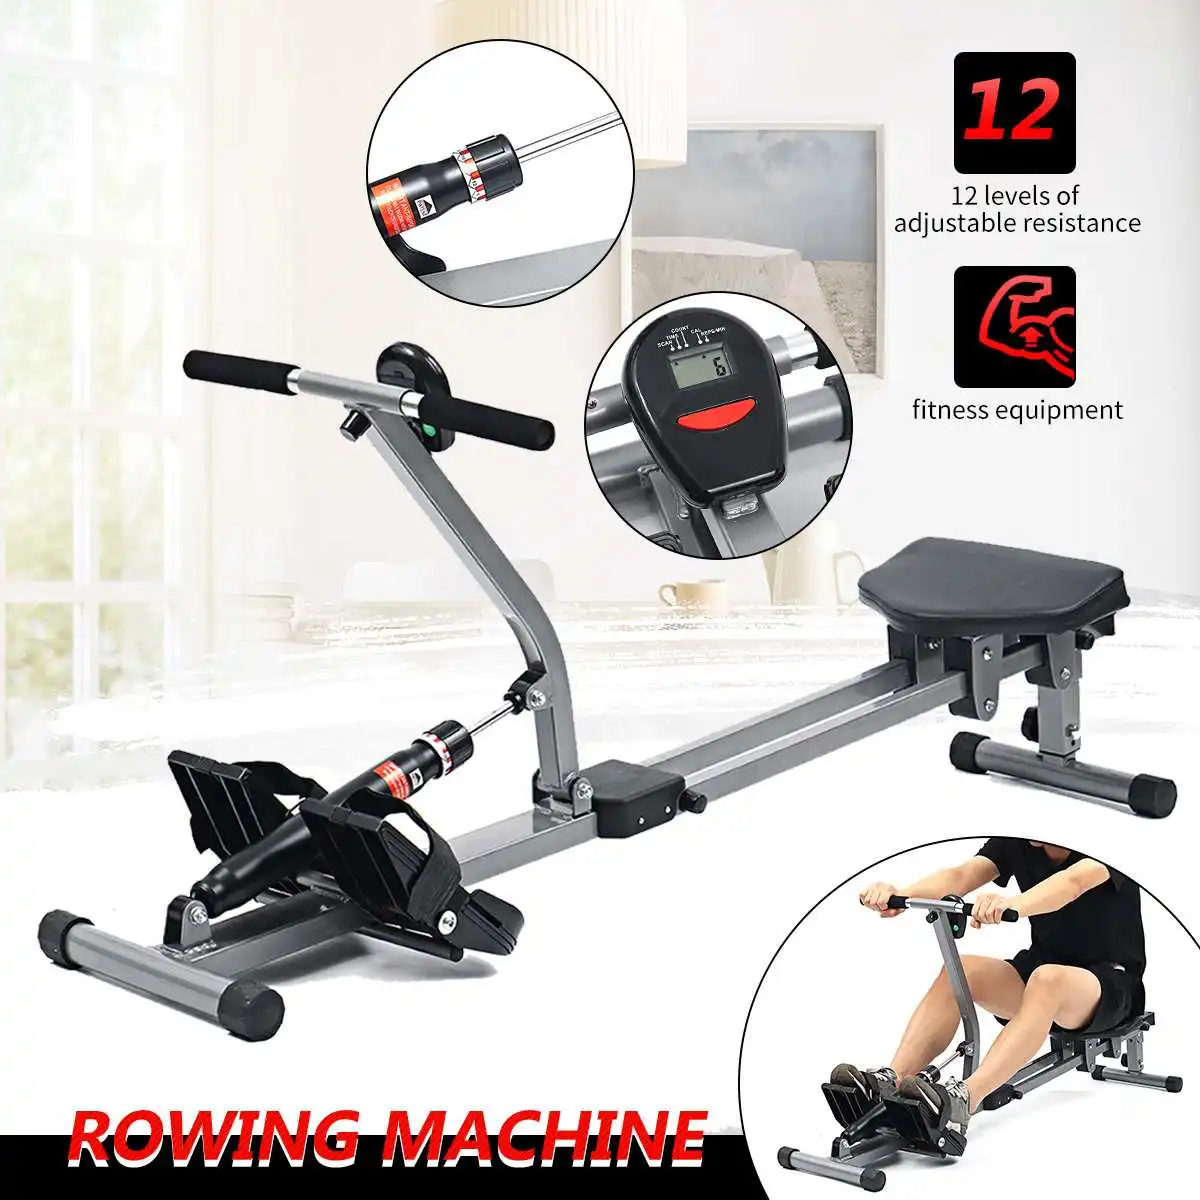 Rowing Machines 12 Level Rower Resistance Cardio Exercise Fitness Home Gym Sport 